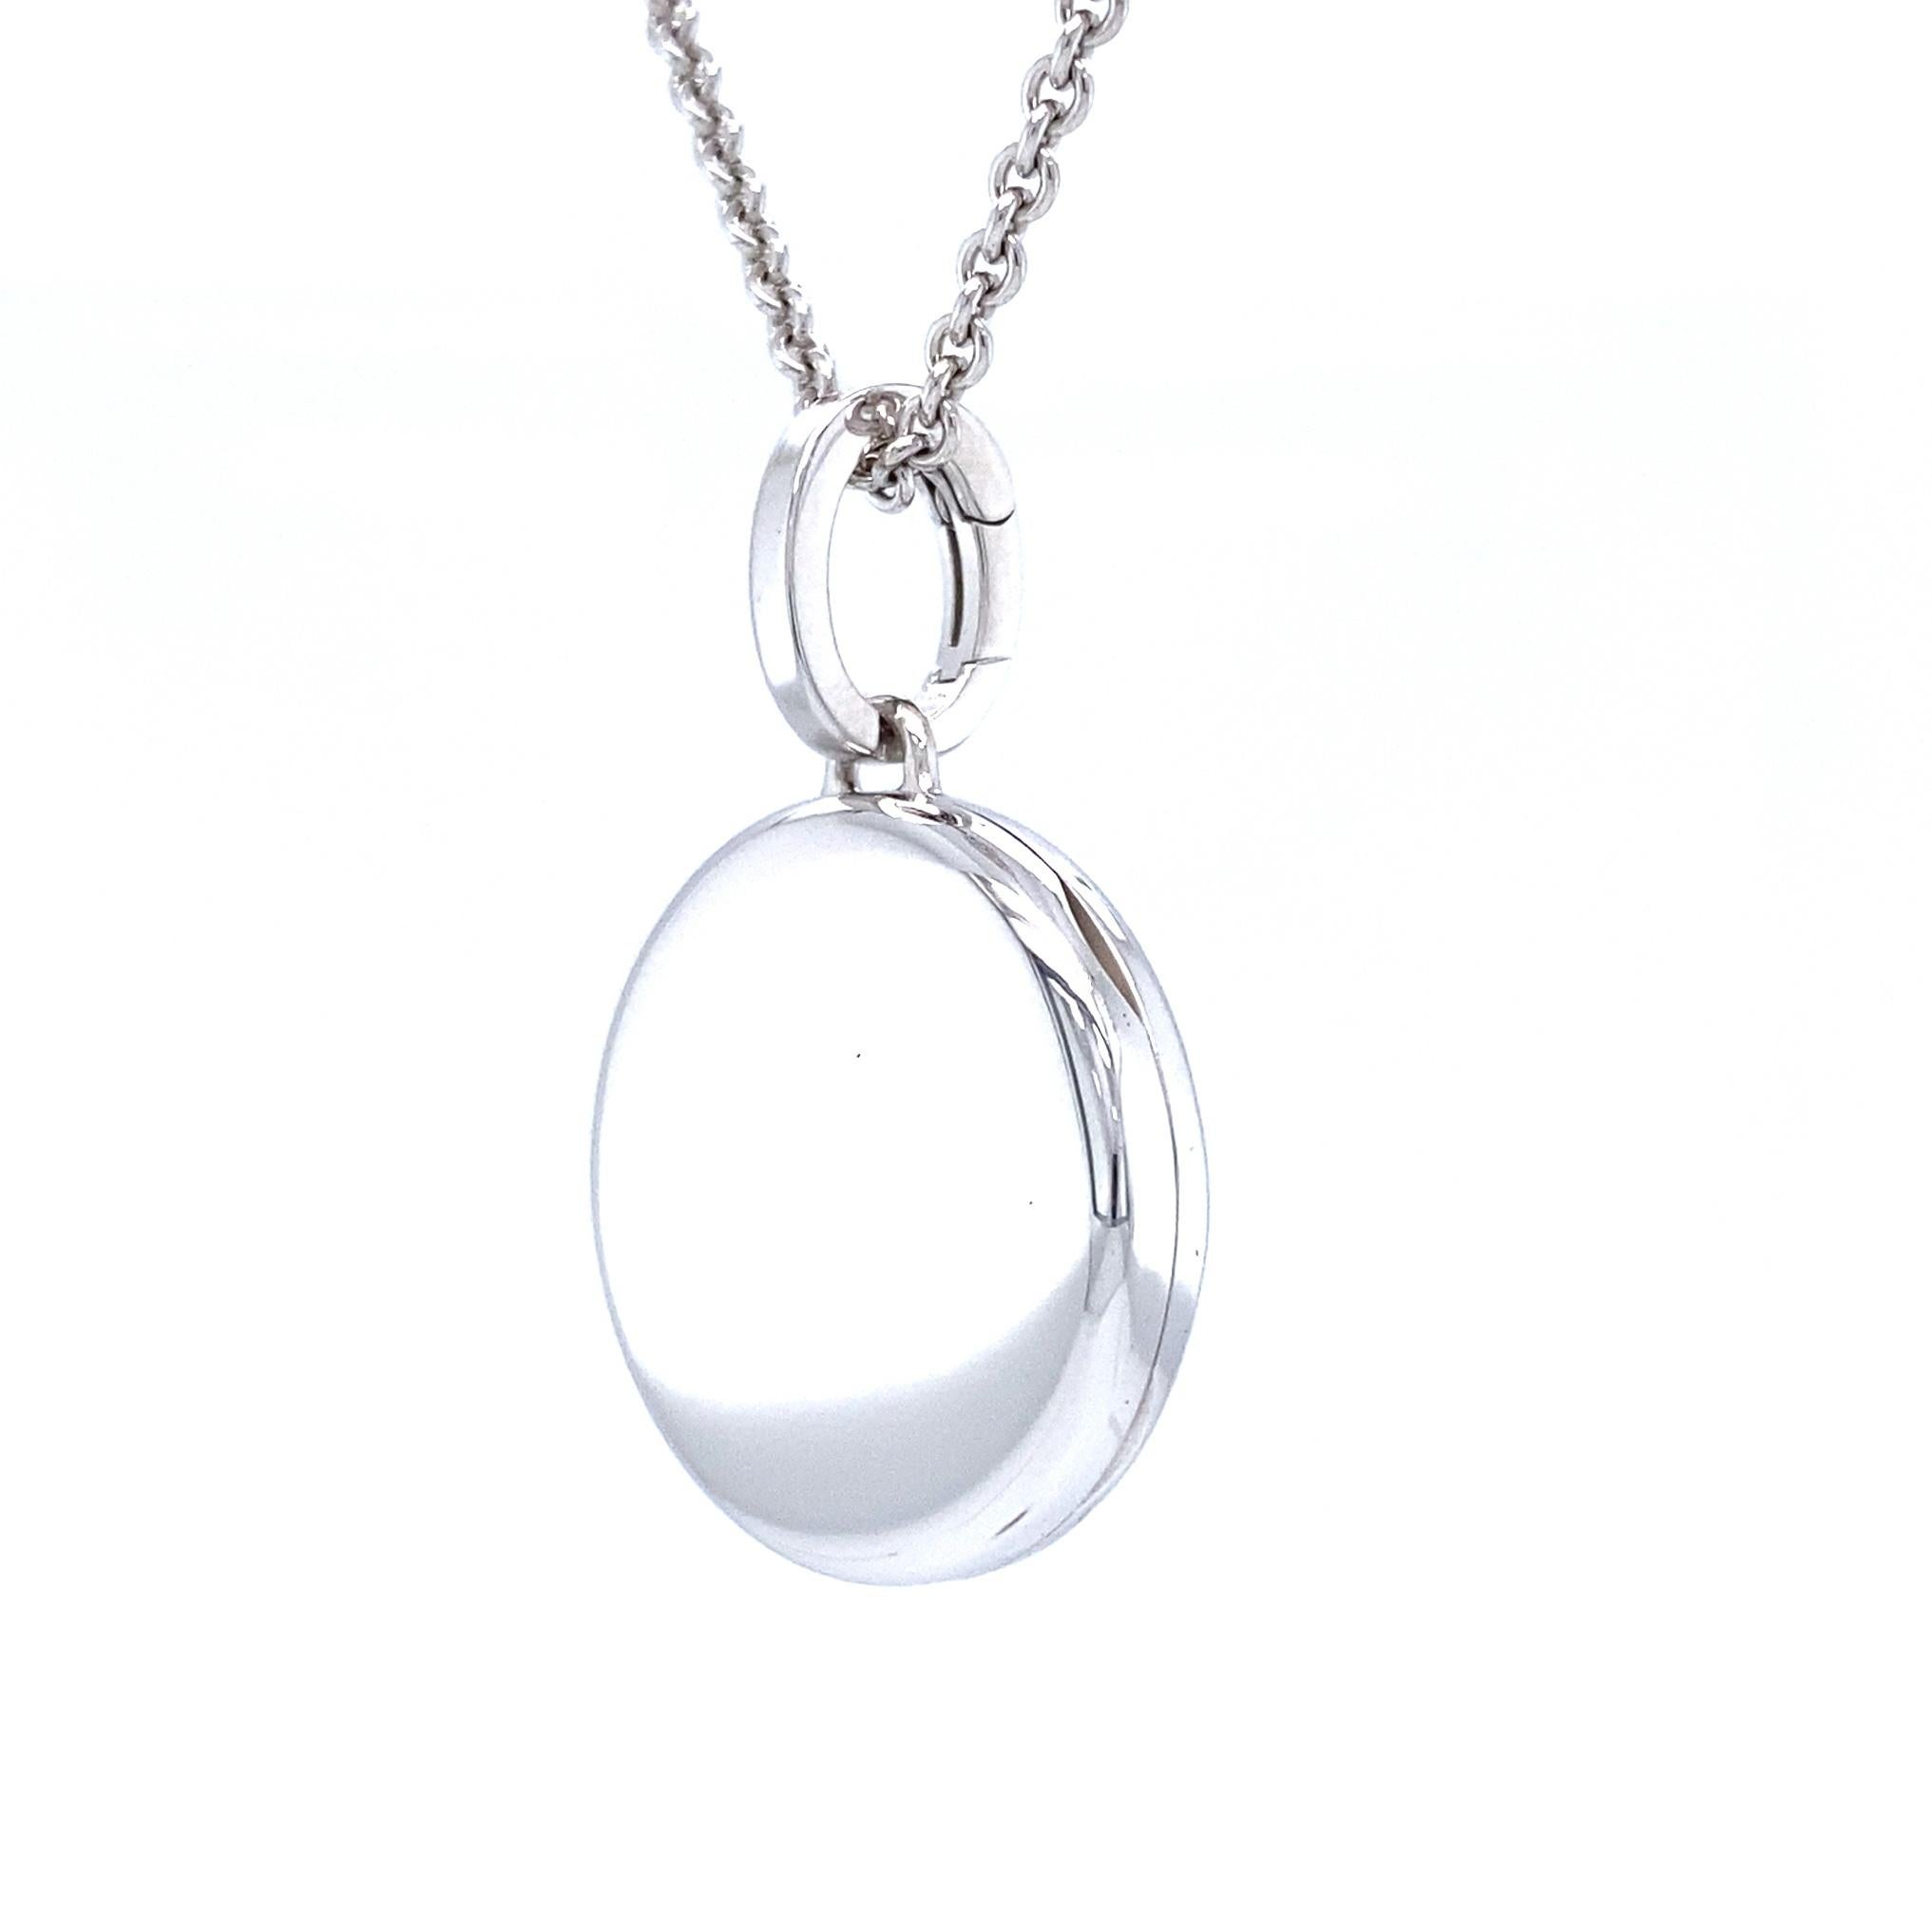 Victor Mayer round customizable polished pendant locket, 18k white gold, Hallmark Collection, diameter app. 21.0 mm

About the creator Victor Mayer
Victor Mayer is internationally renowned for elegant timeless designs and unrivalled expertise in